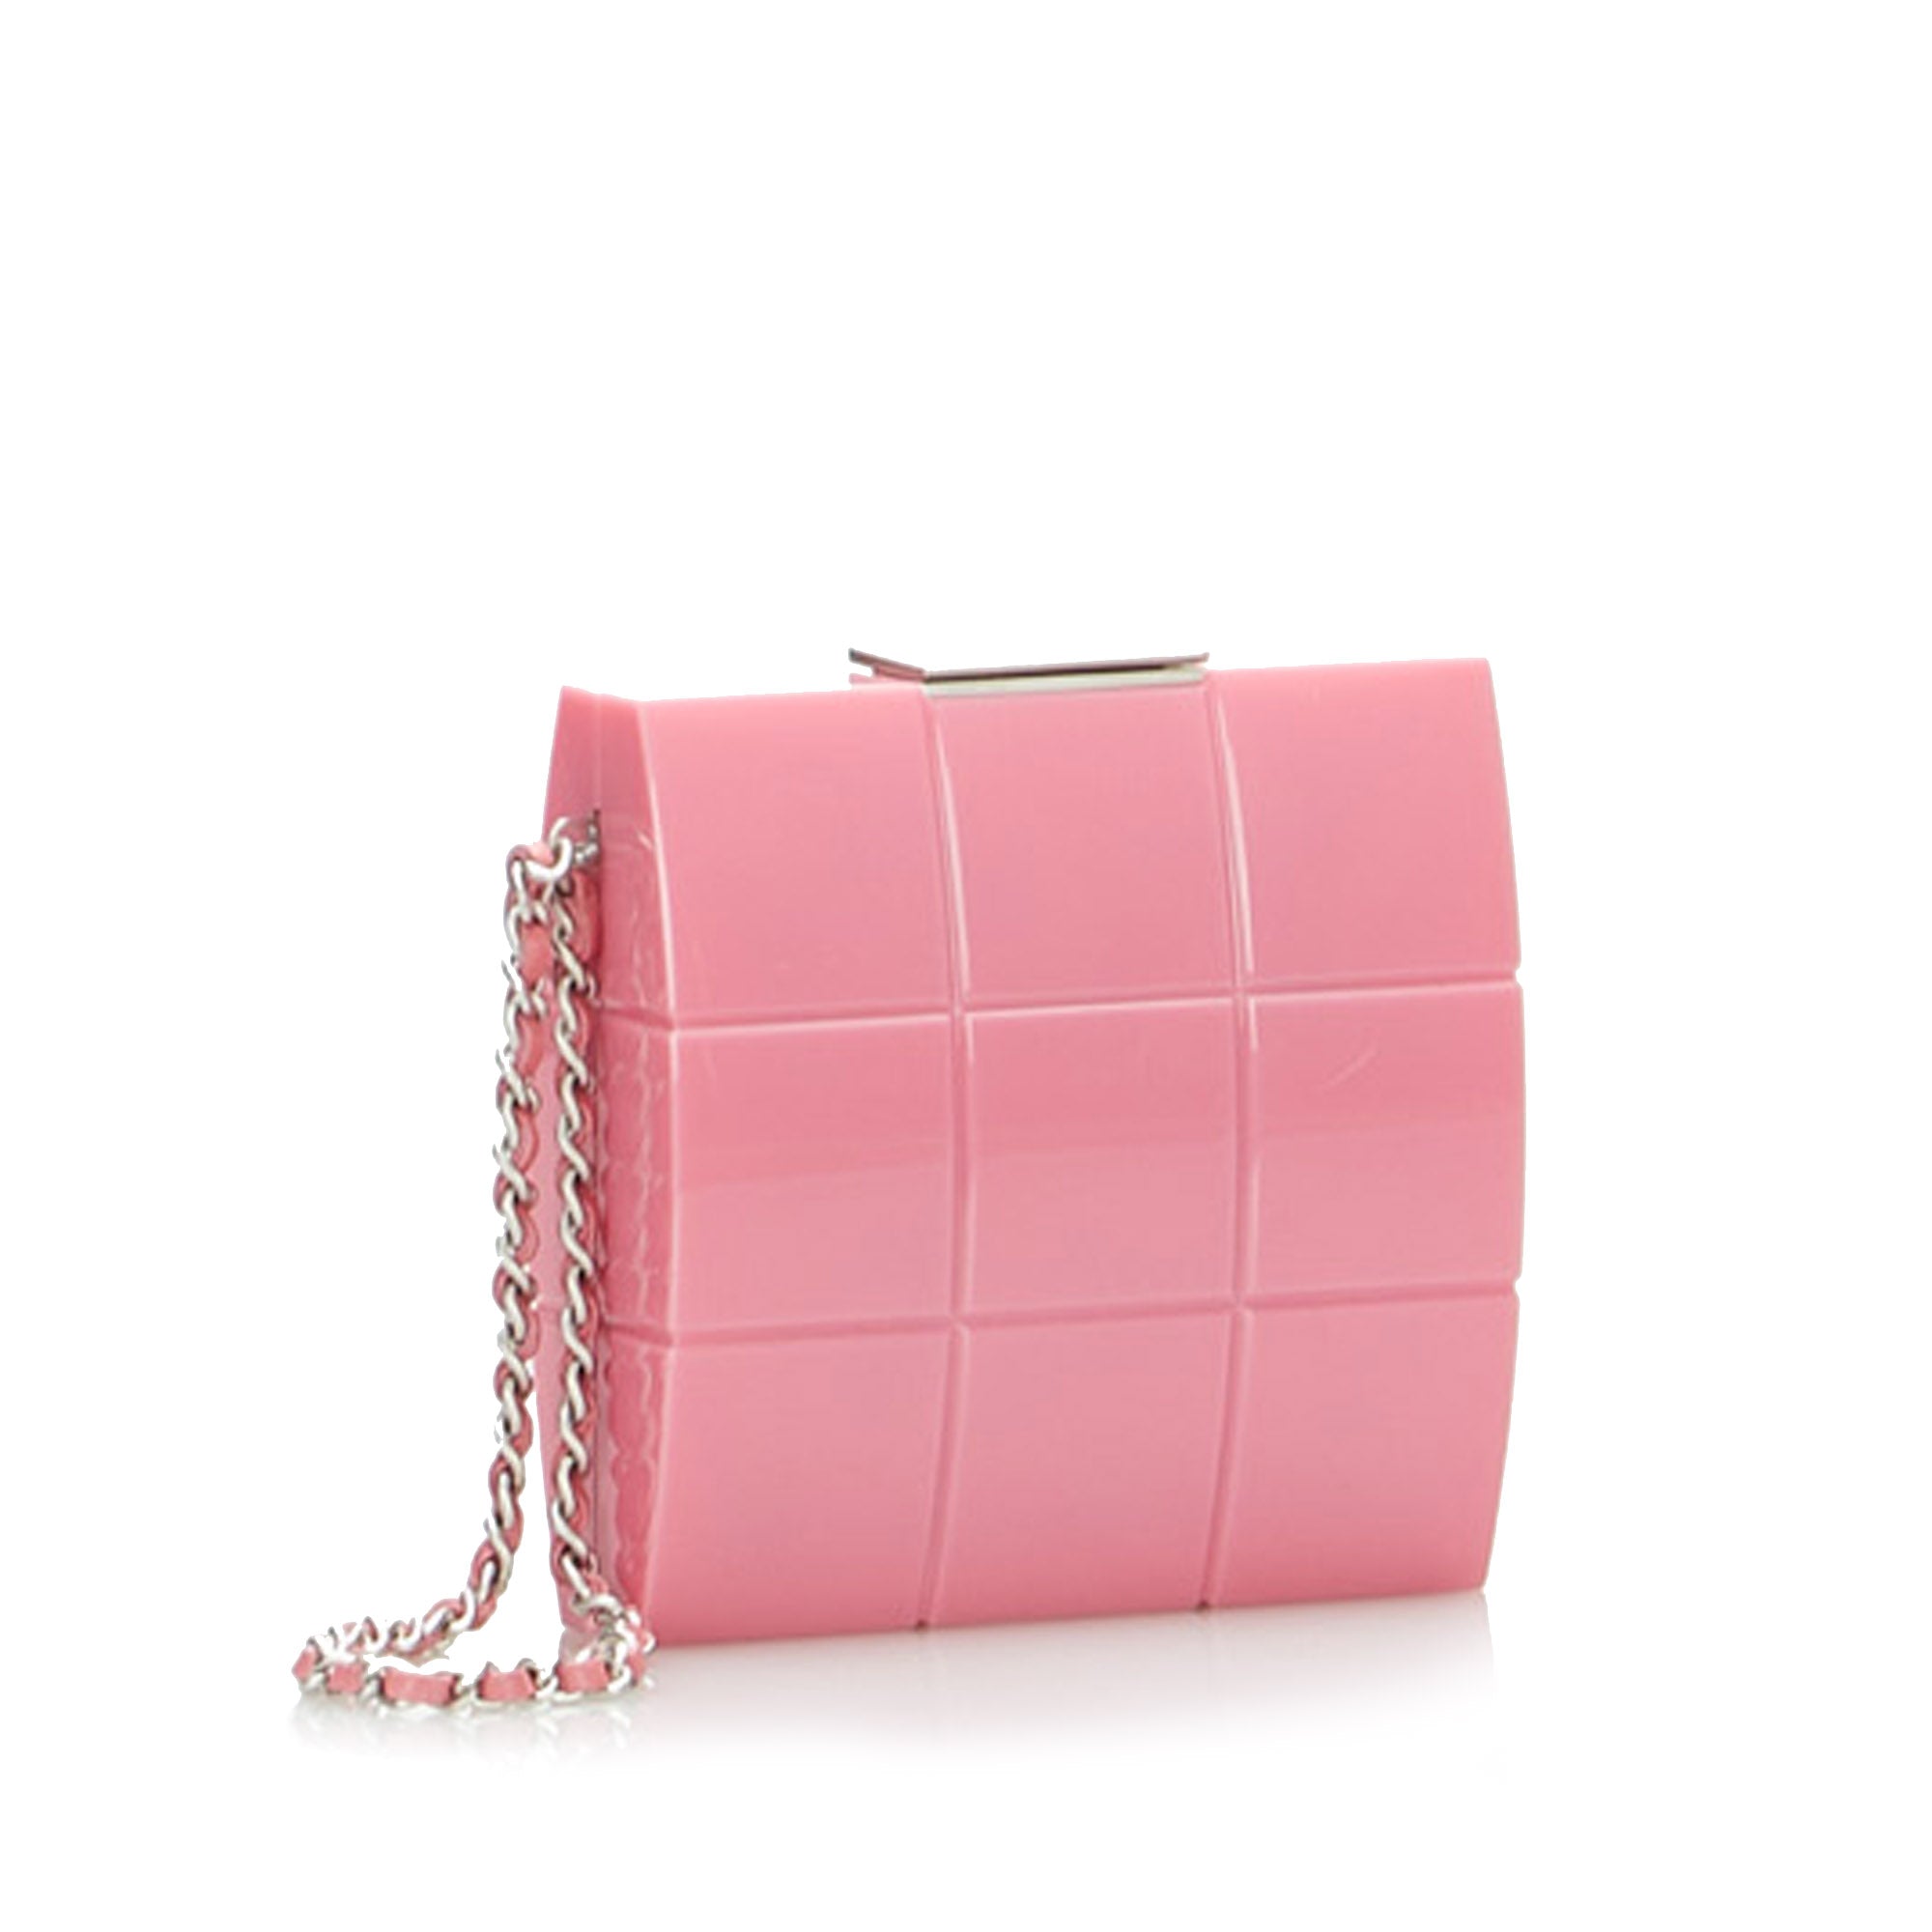 Pink Chanel Lucite Minaudiere Perspex Clutch Bag